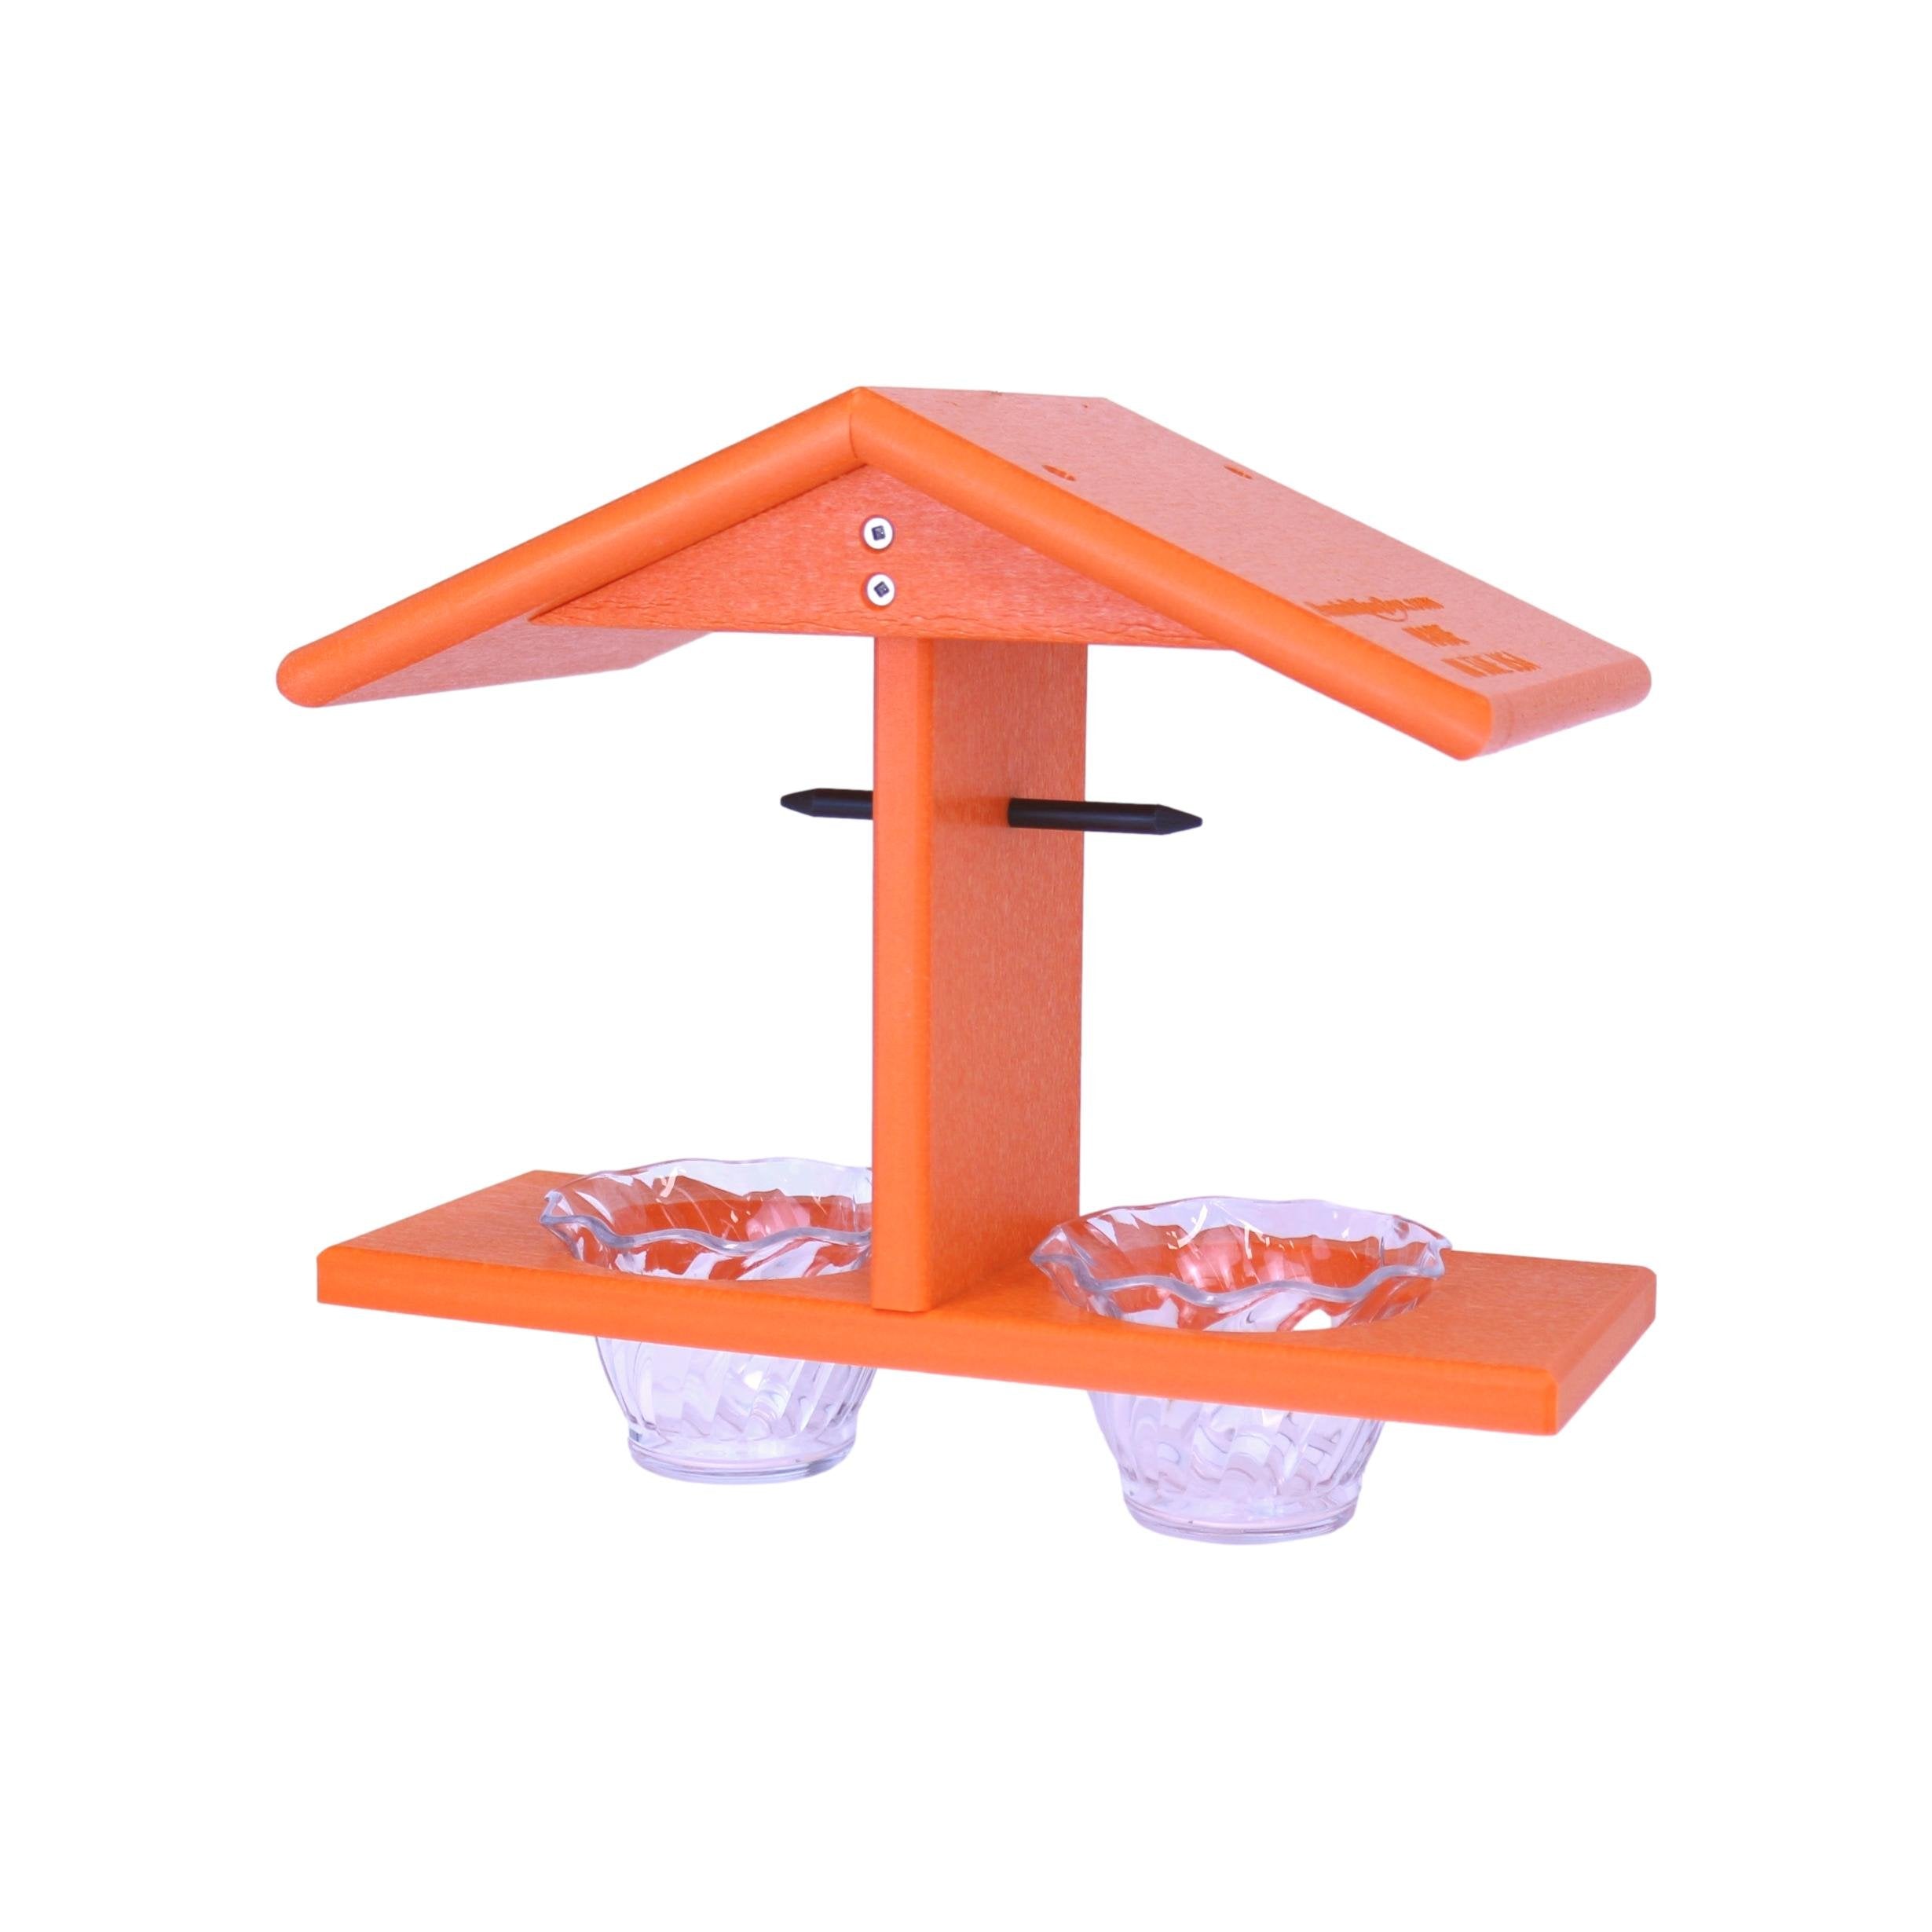 Amish-Made Double-Cup Oriole Bird Feeder, Jelly Oriole Feeder with Pegs for Orange Halves